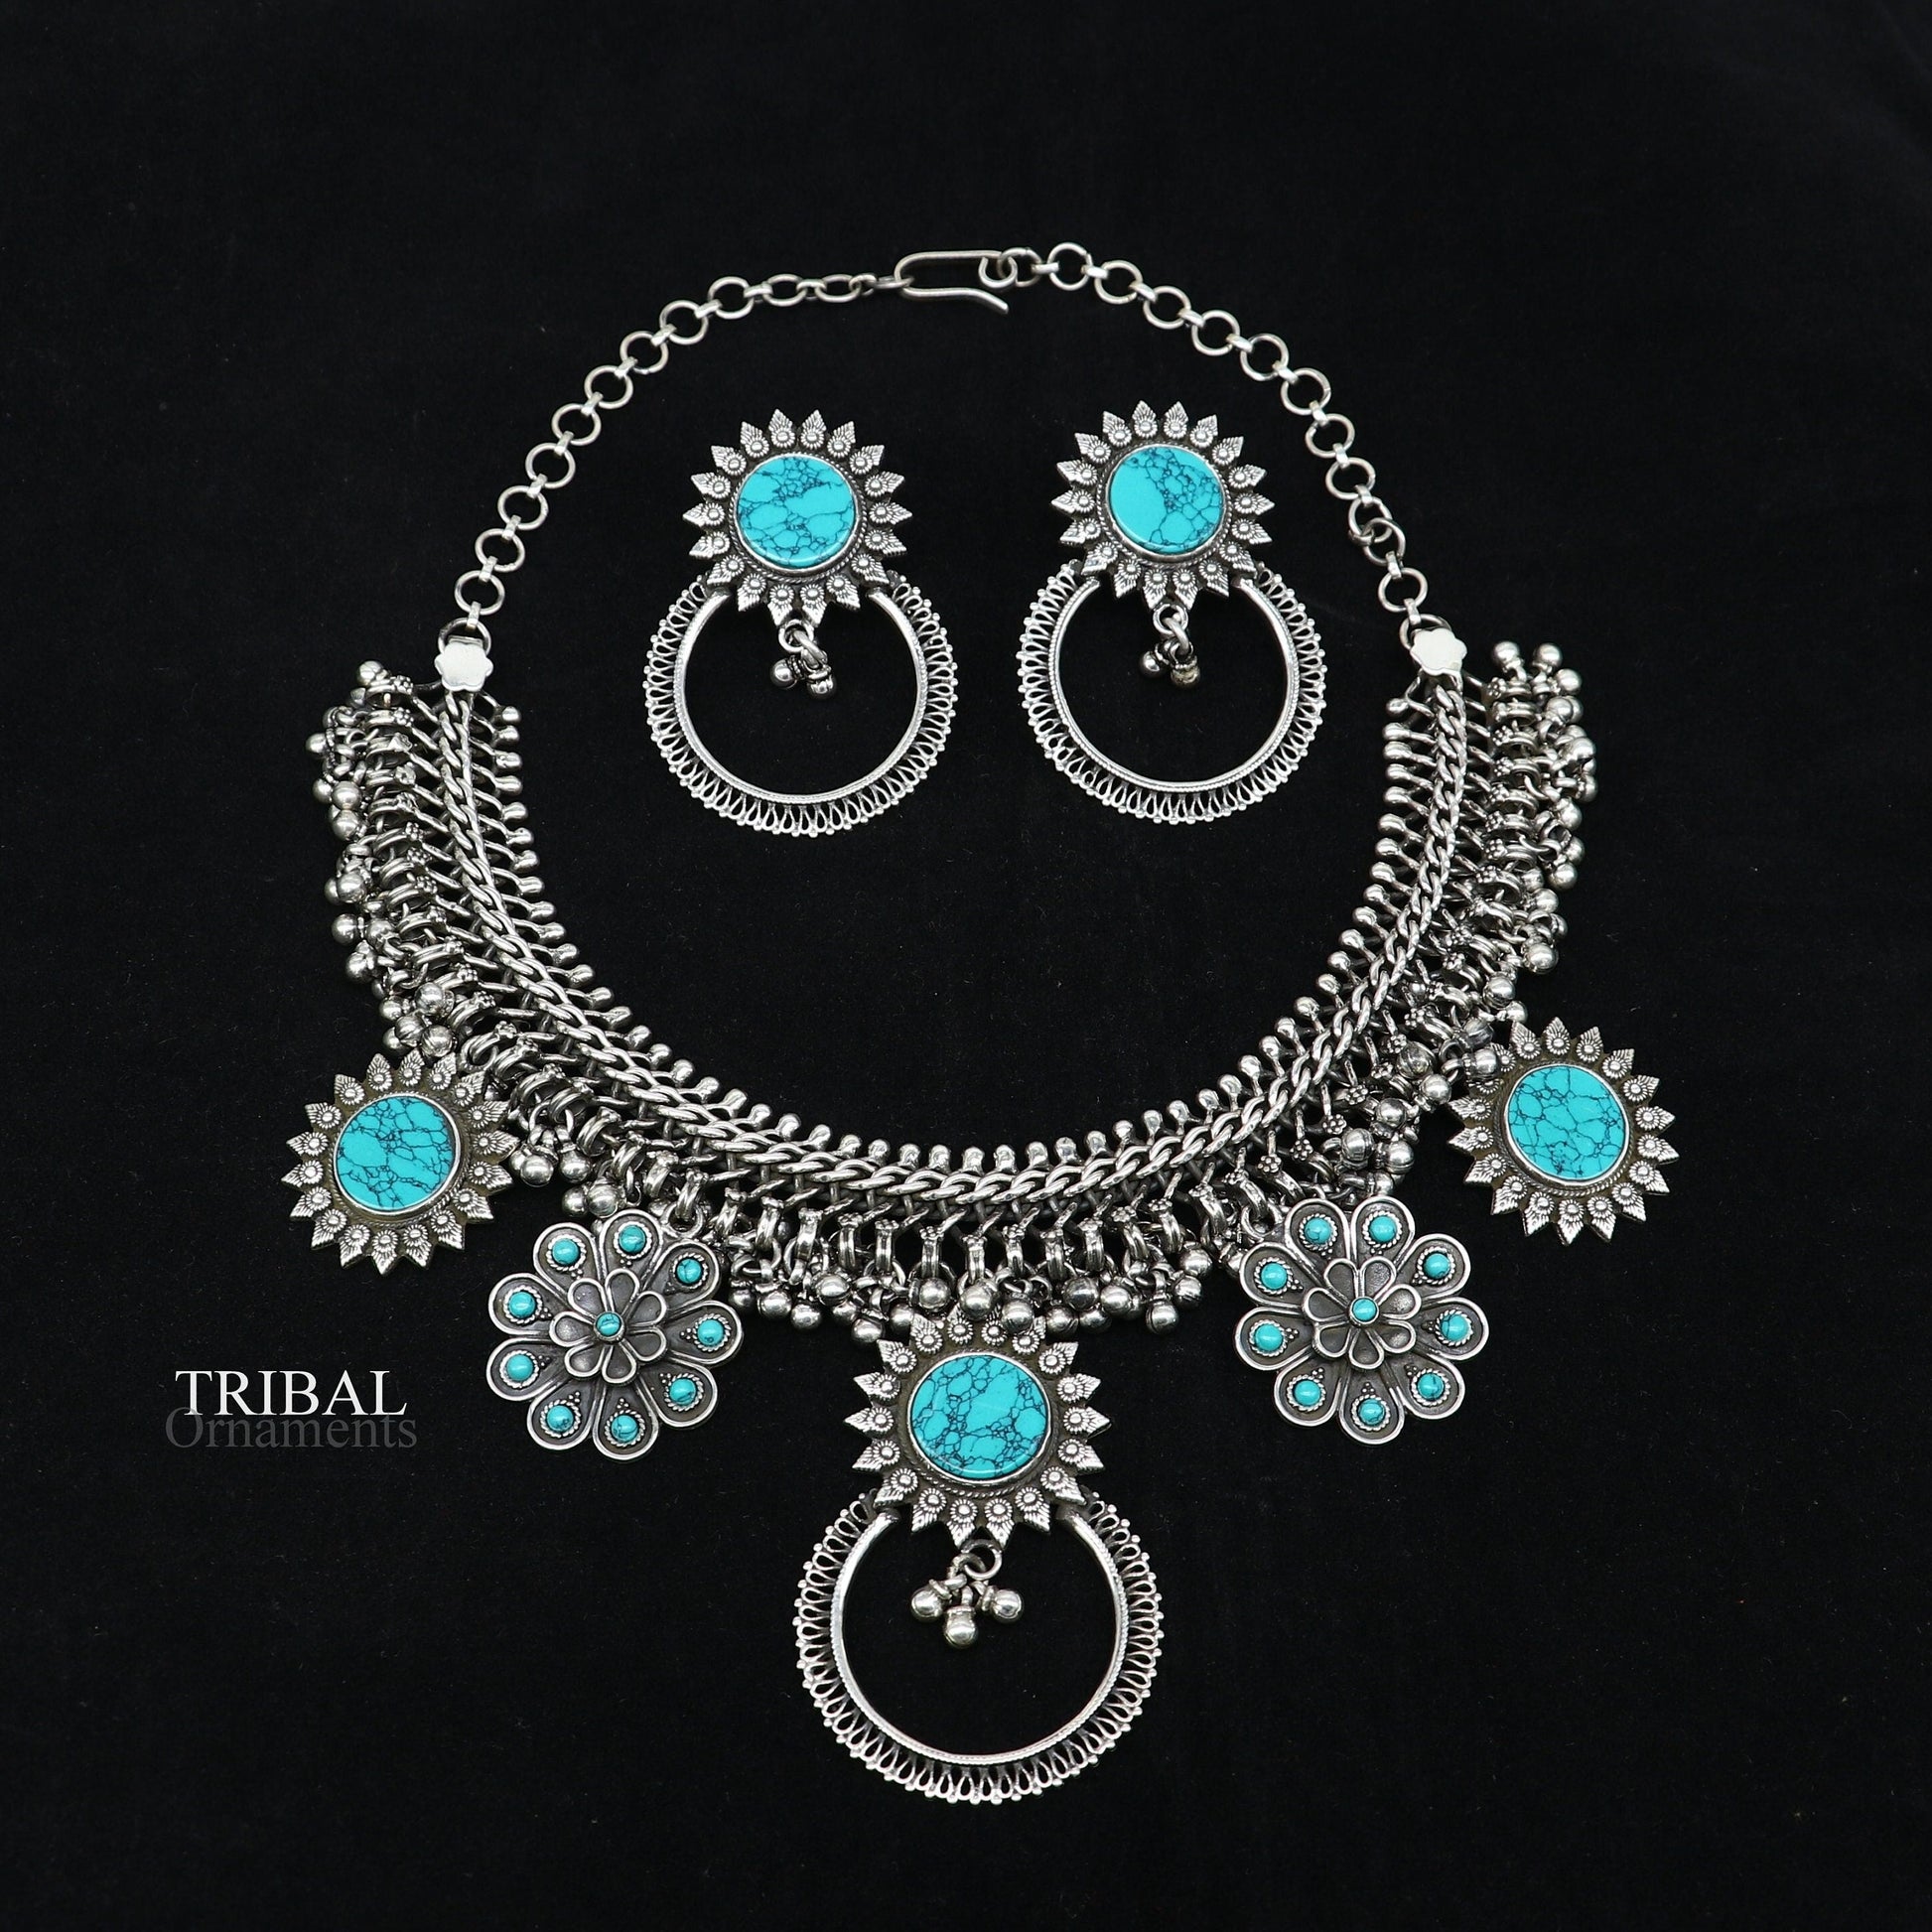 925 sterling silver handcrafted vintage design ethnic charm necklace excellent gifting tribal brides belly dance jewelry india set292 - TRIBAL ORNAMENTS